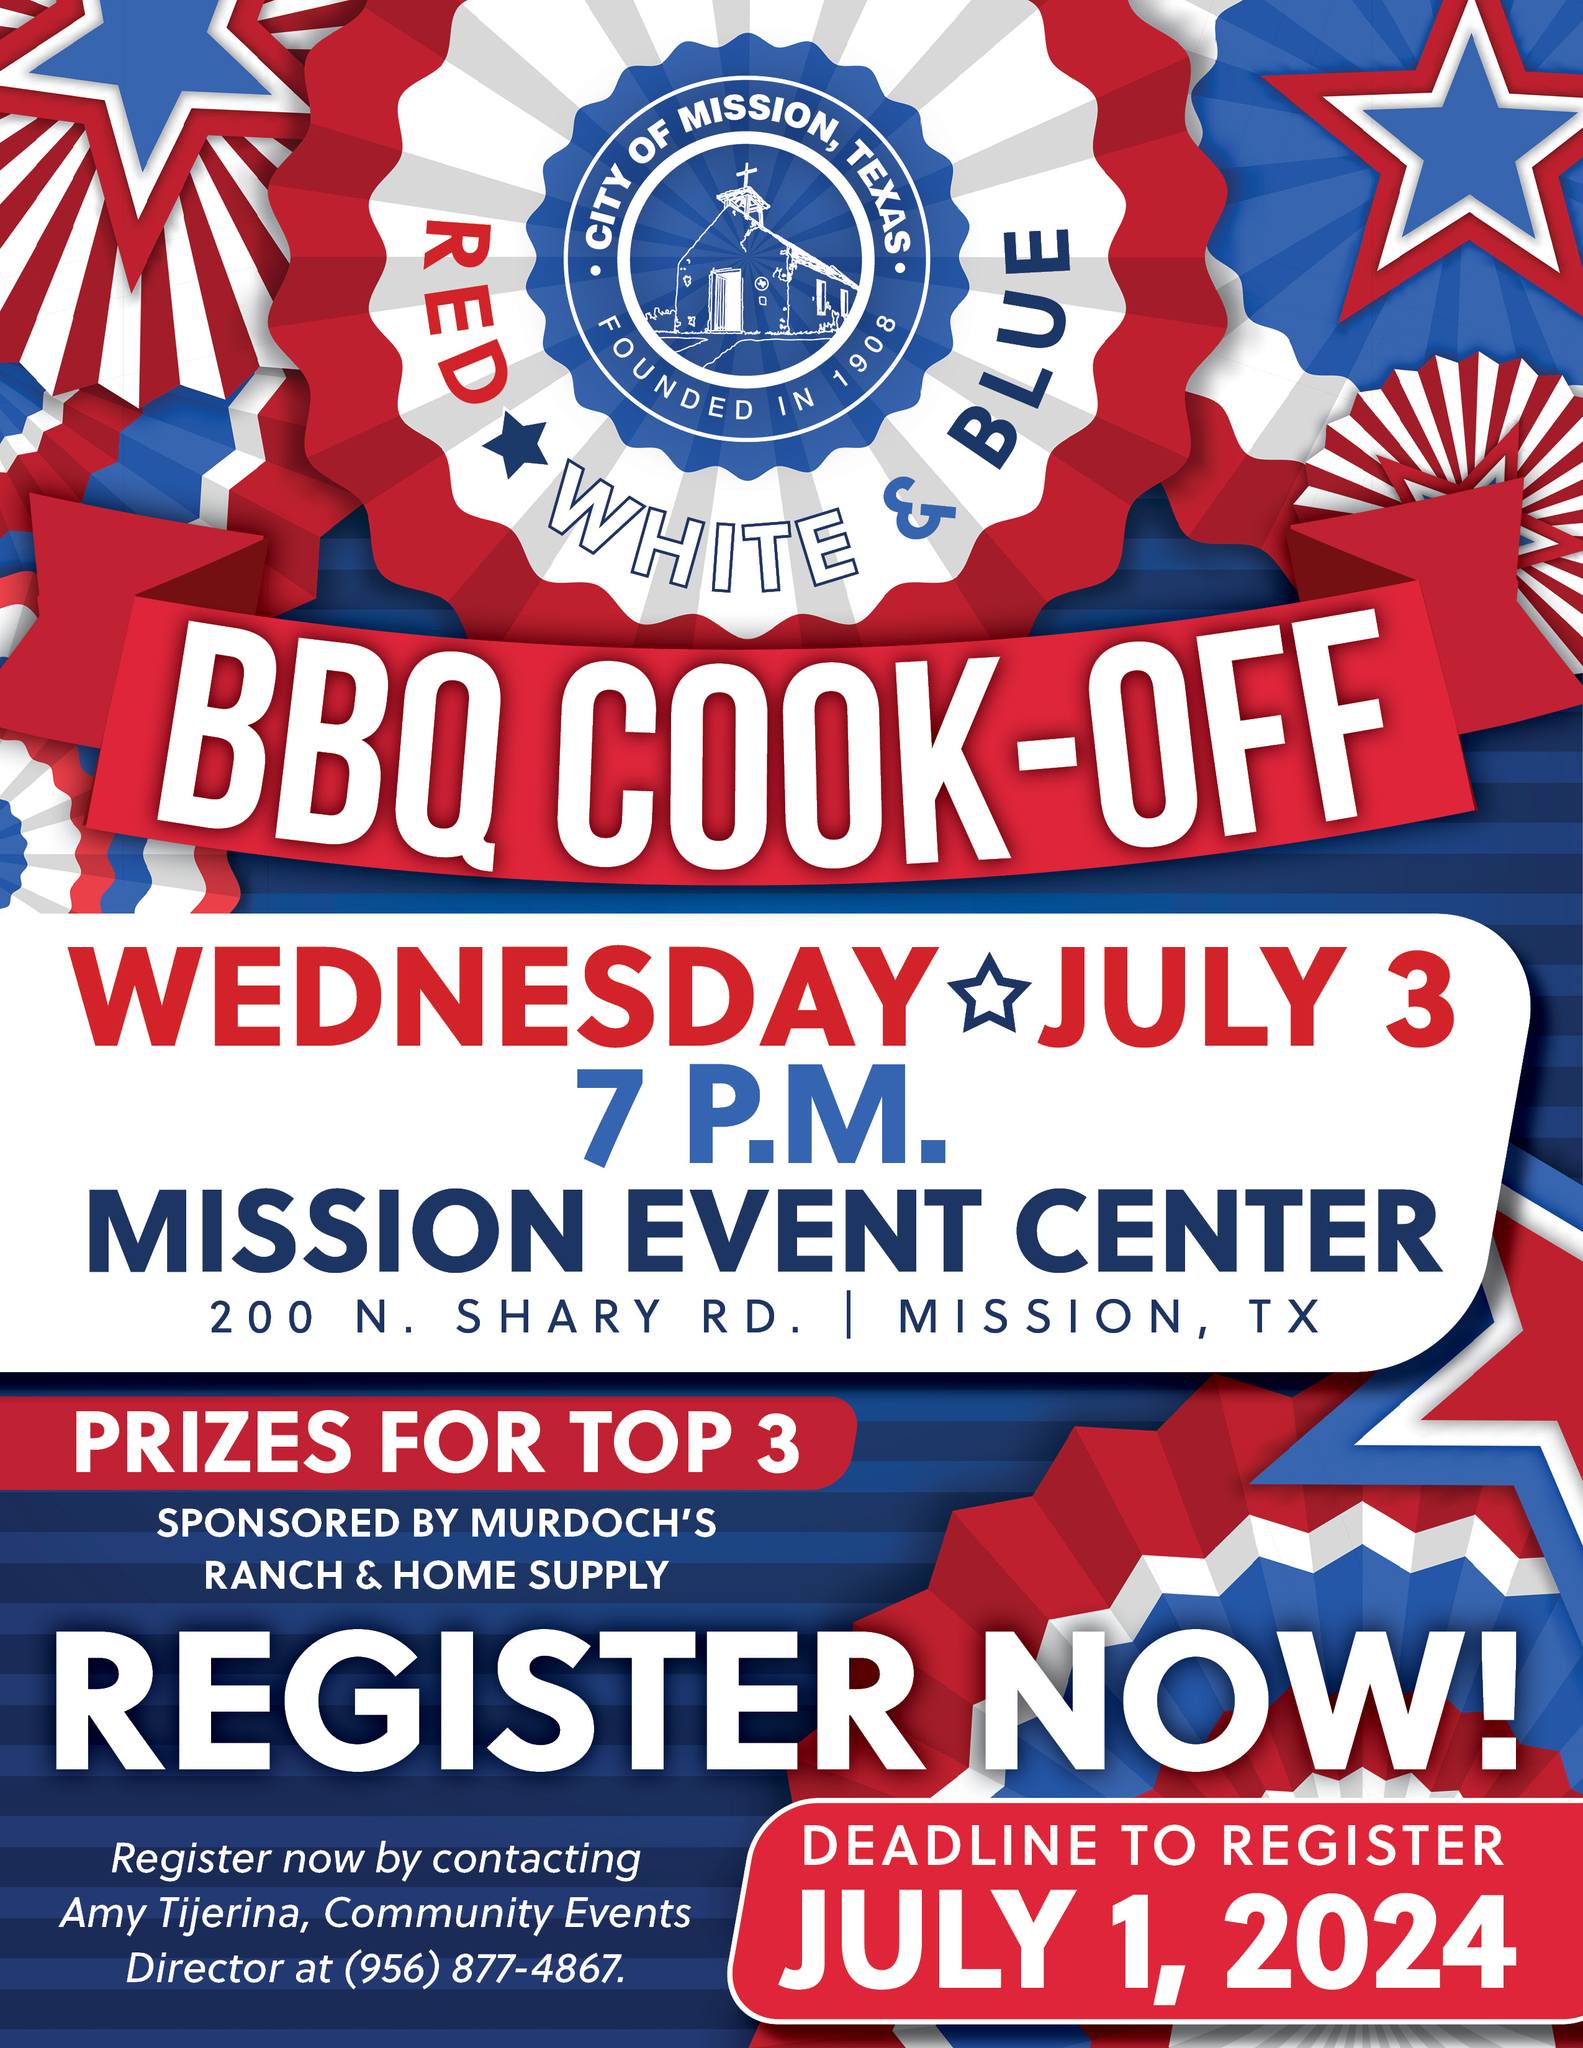 The Red, White & Blue Festival Cook-Off